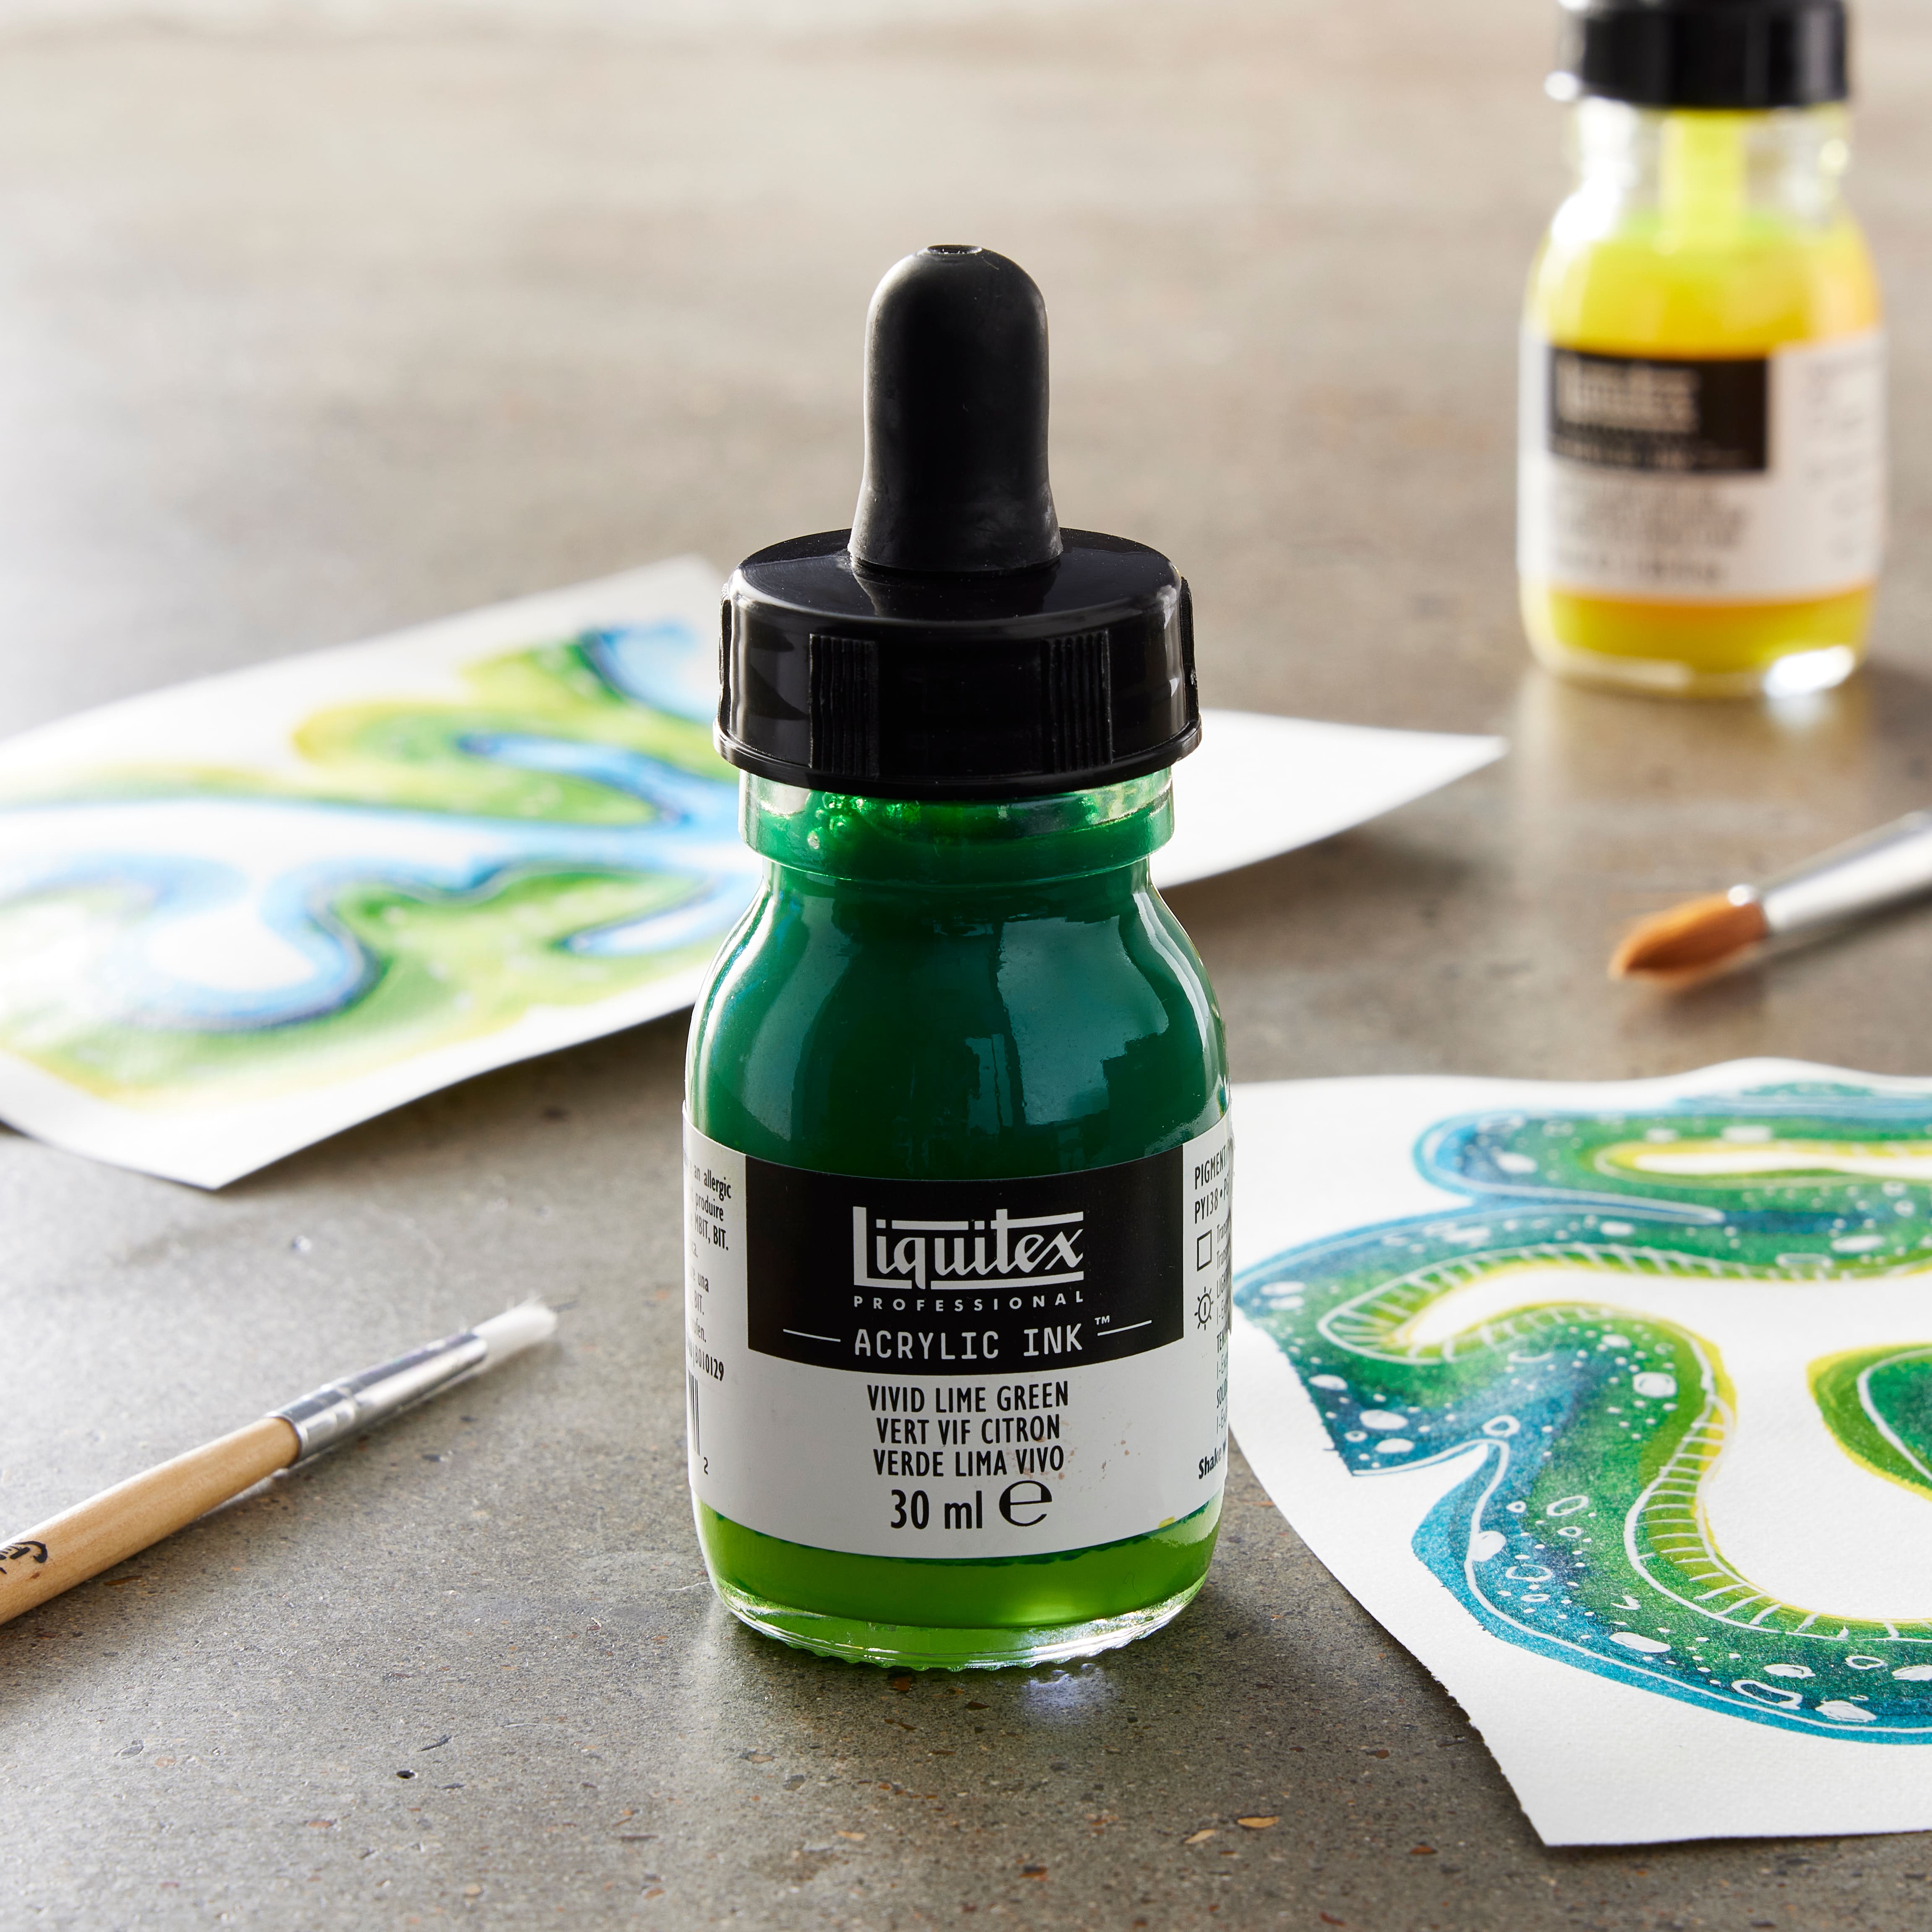 Liquitex Professional Acrylic Ink - The Oil Paint Store